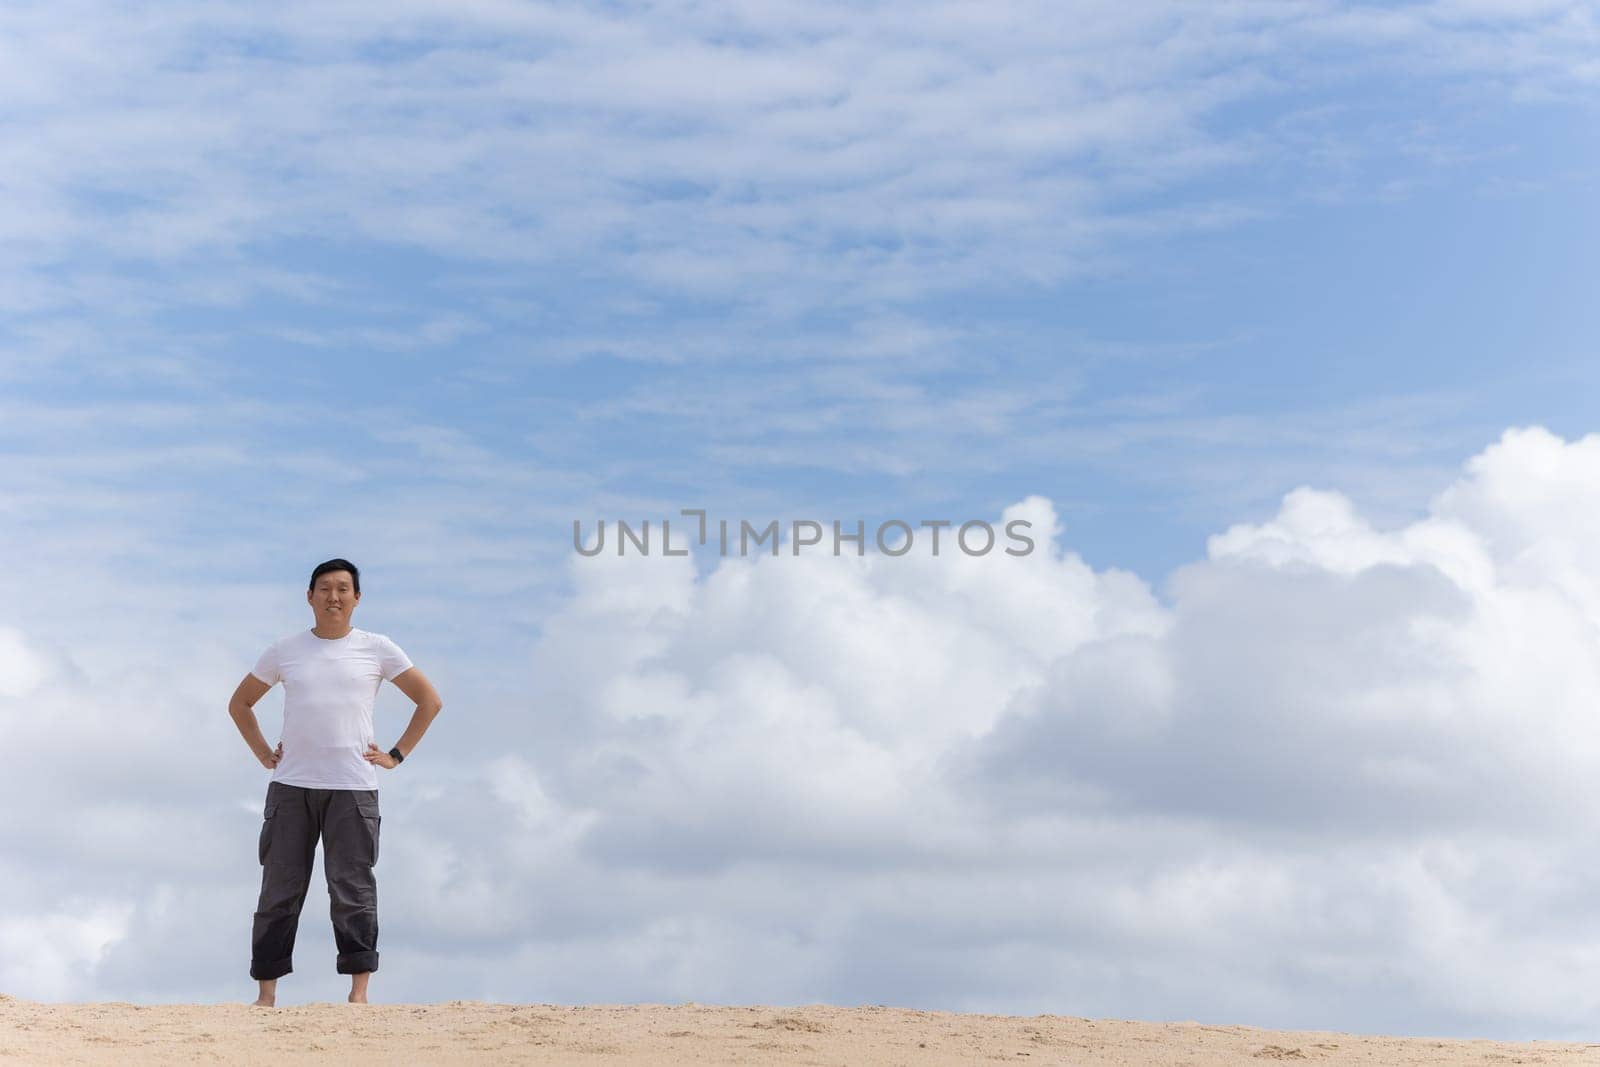 A woman stands on a beach with a cloudy sky in the background. She is wearing a white shirt and grey pants